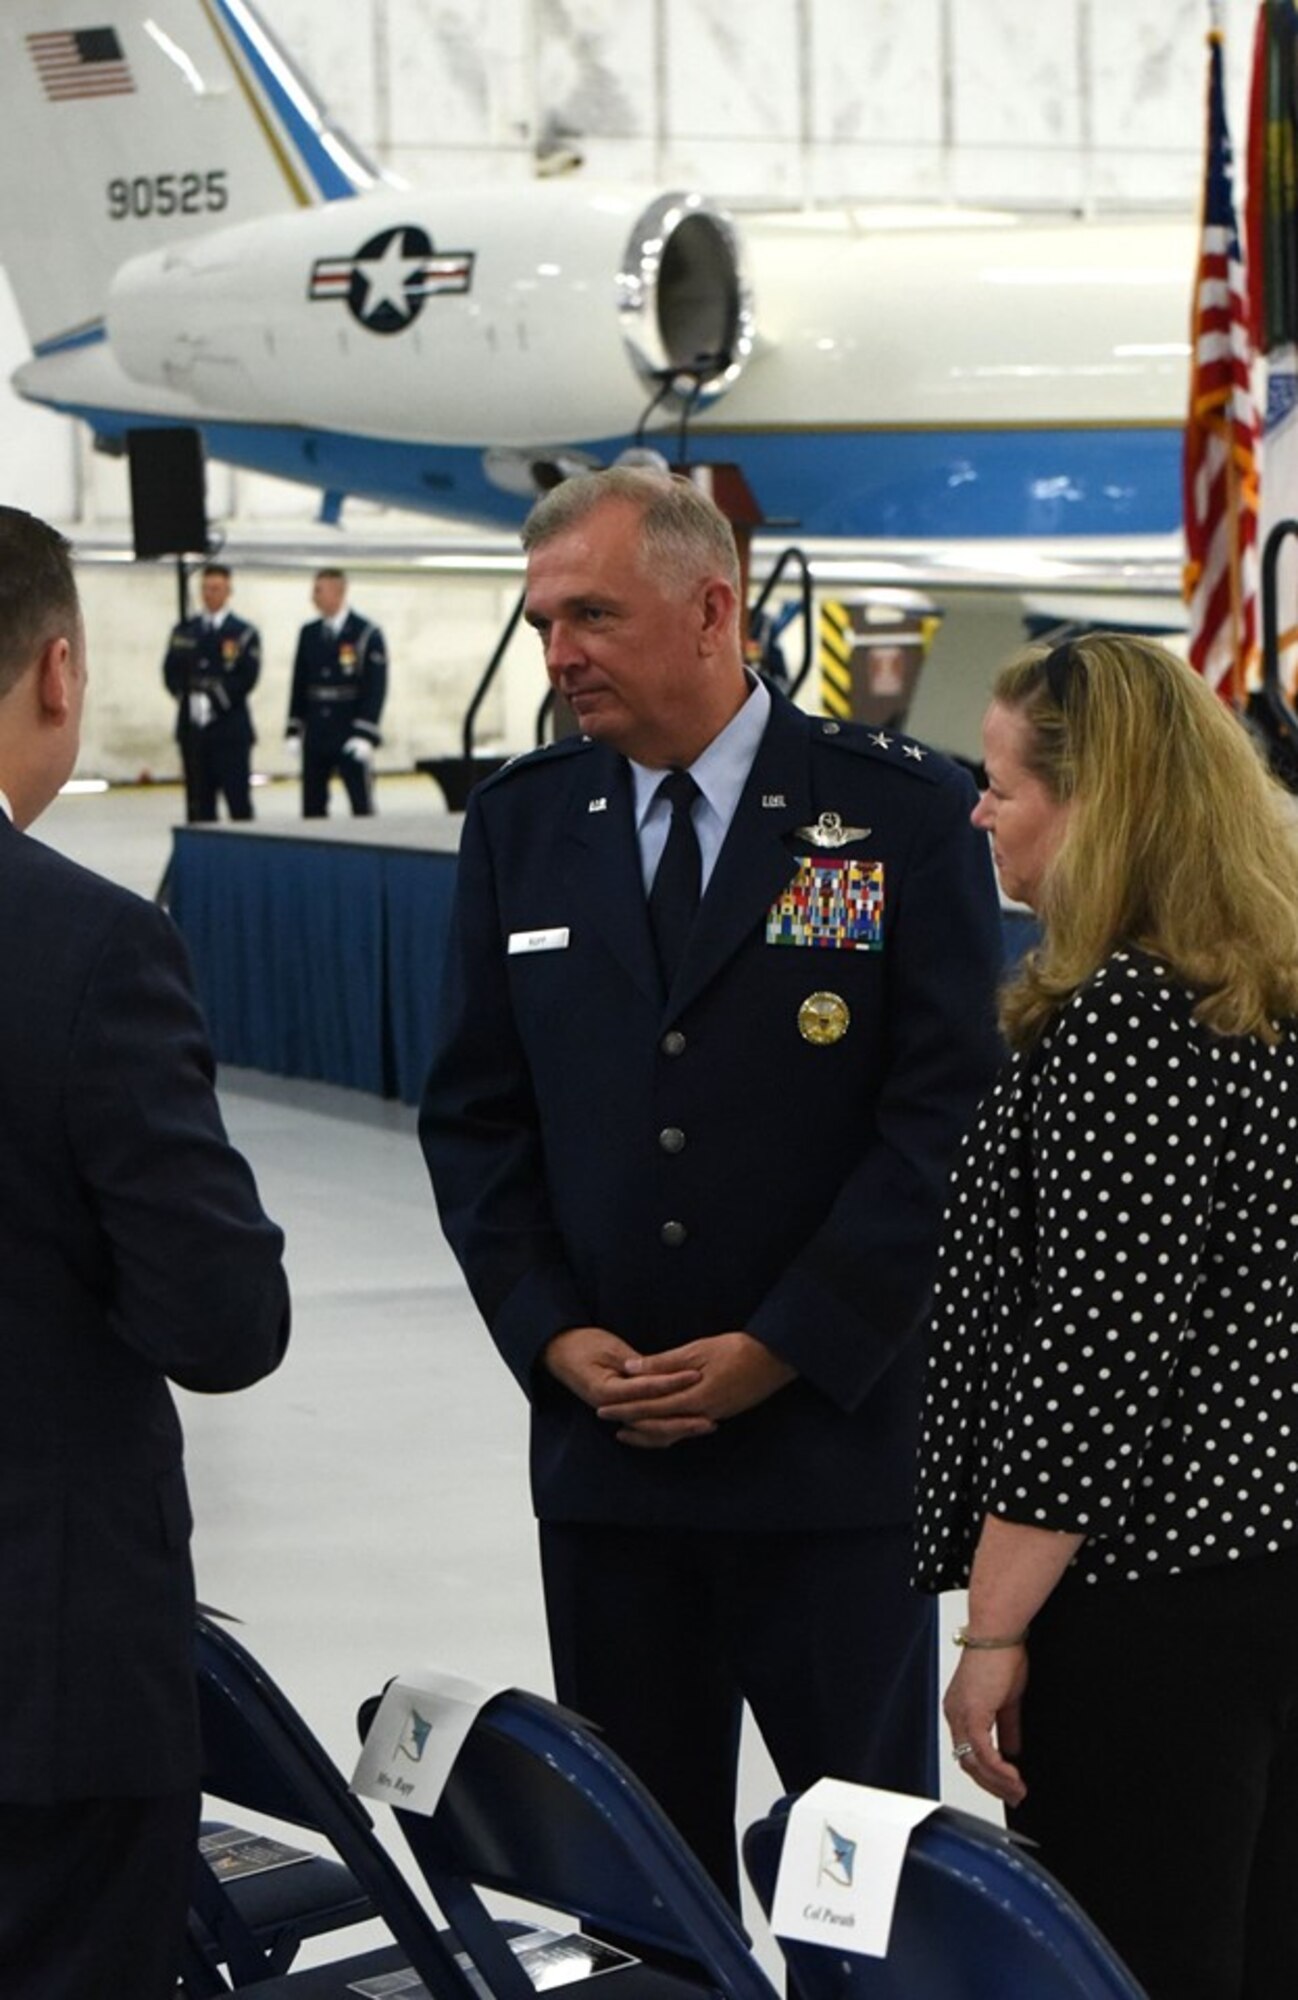 Air Force District of Washington Commander Maj. Gen. Ricky N. Rupp and his wife, Charlotte, chat with fellow attendees of the retirement ceremony in honor of United States Air Force Gen. Paul J. Selva, Vice Chairman of the Joint Chiefs of Staff. Selva, the 10th Vice Chairman of The Joint Staff, retires from the Air Force after more than 39 years of honorable service. (U.S. Air Force photo/James E. Lotz)